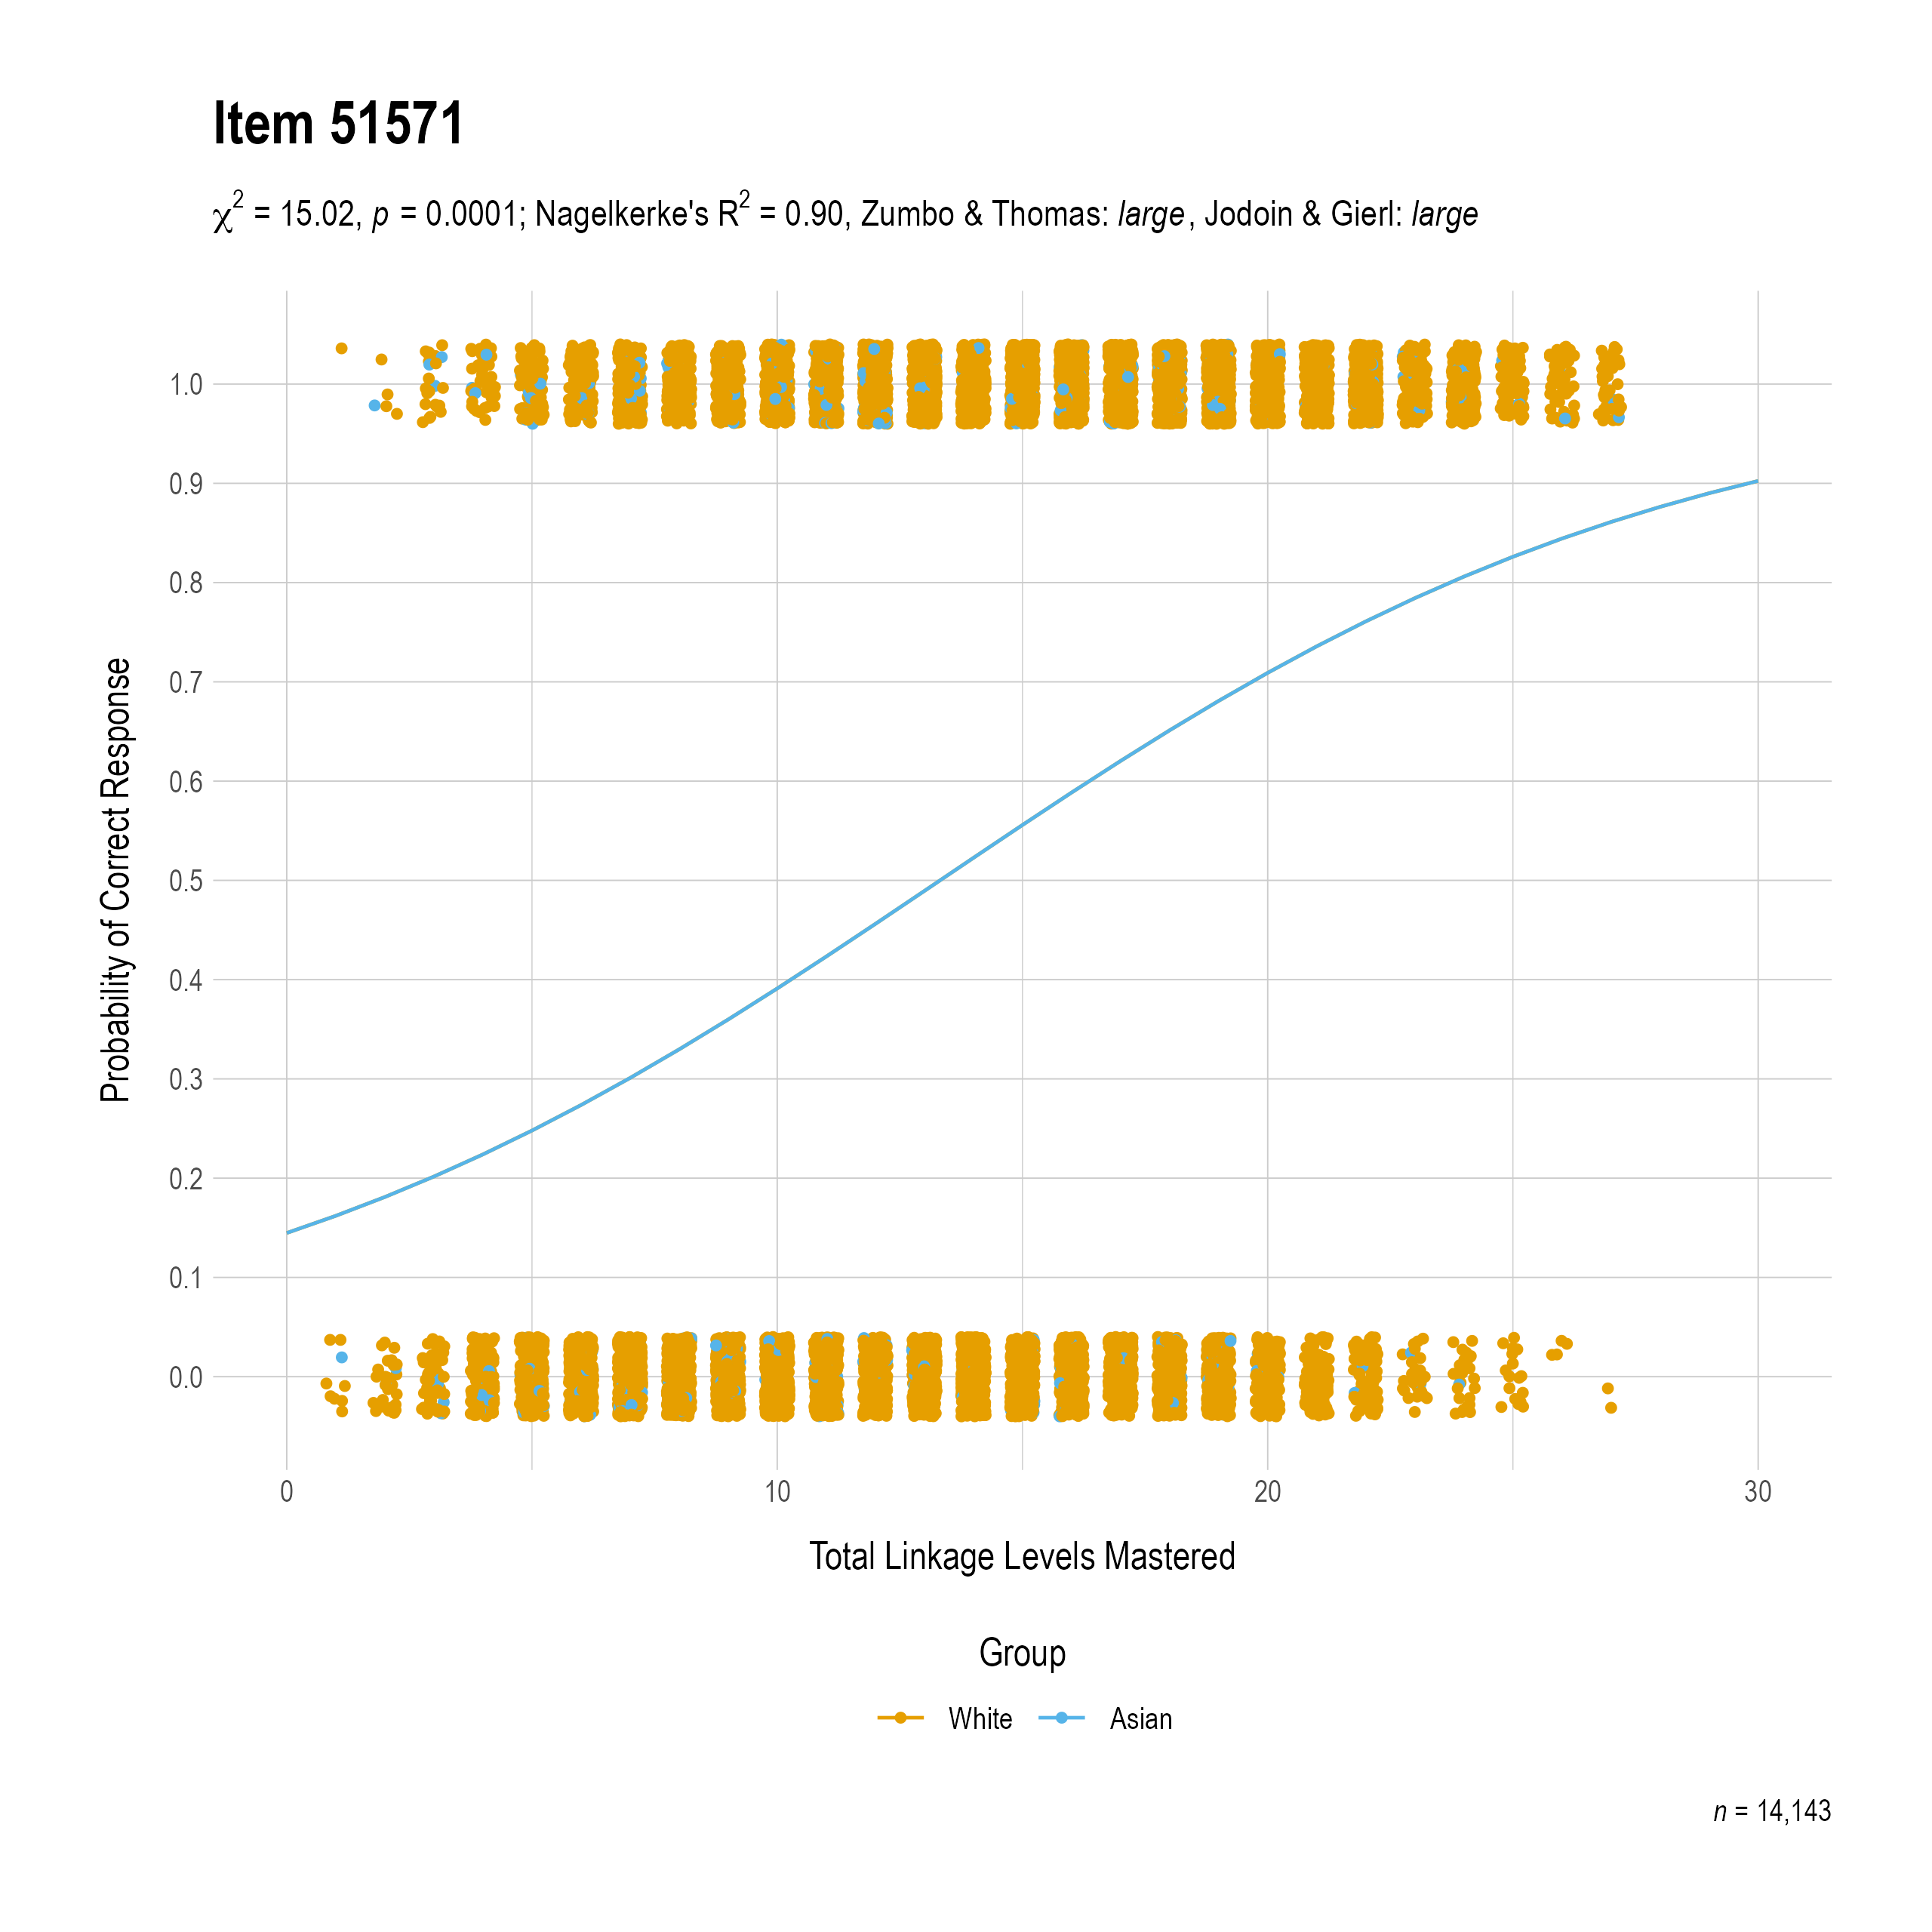 The plot of the uniform race differential item function evidence for Science item 51571. The figure contains points shaded by group. The figure also contains a logistic regression curve for each group. The total linkage levels mastered in is on the x-axis, and the probability of a correct response is on the y-axis.